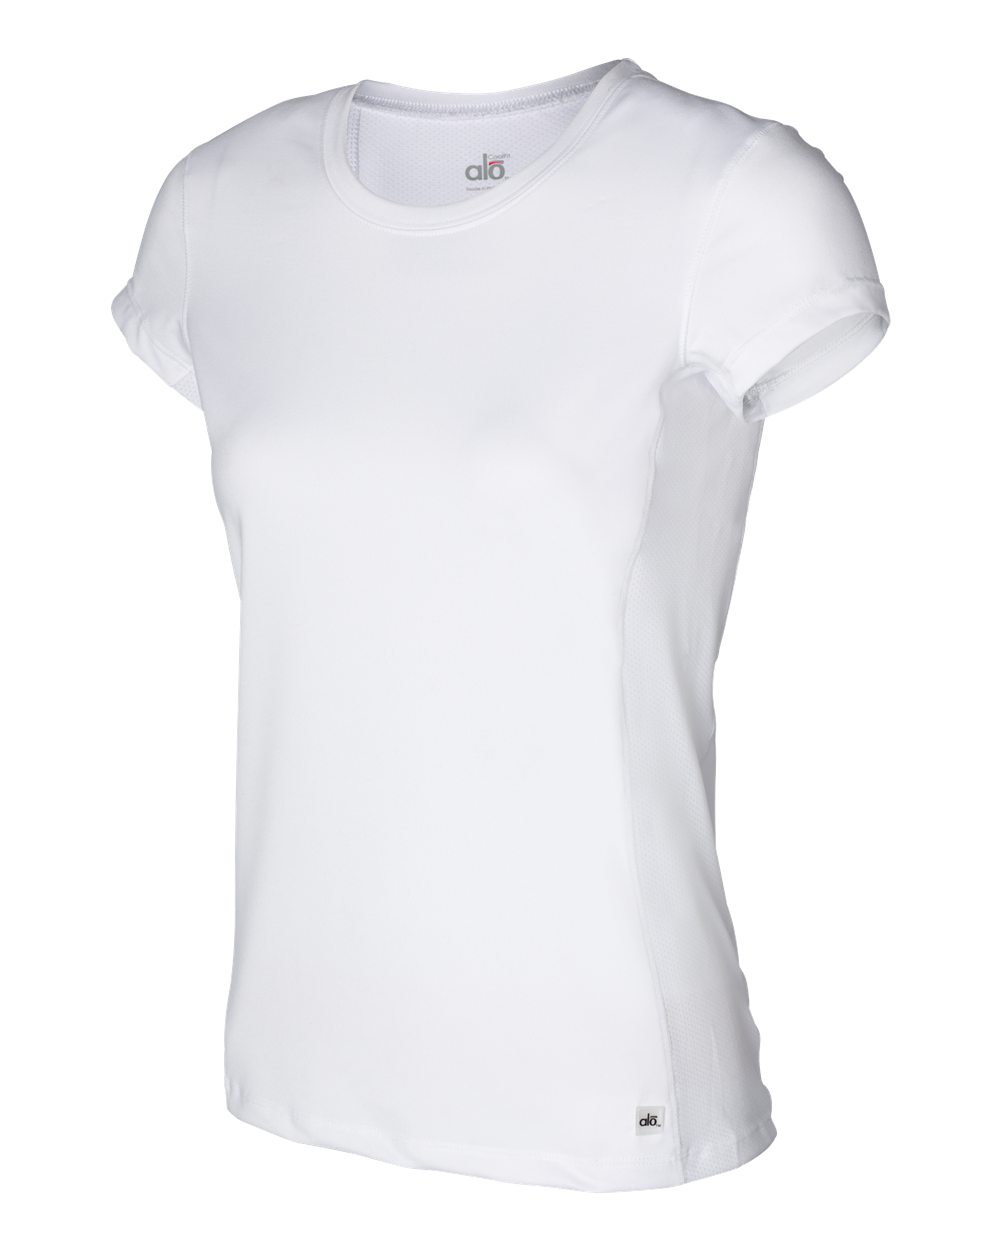 alo - Ladies' T-Shirt with Mesh Panels $16.93